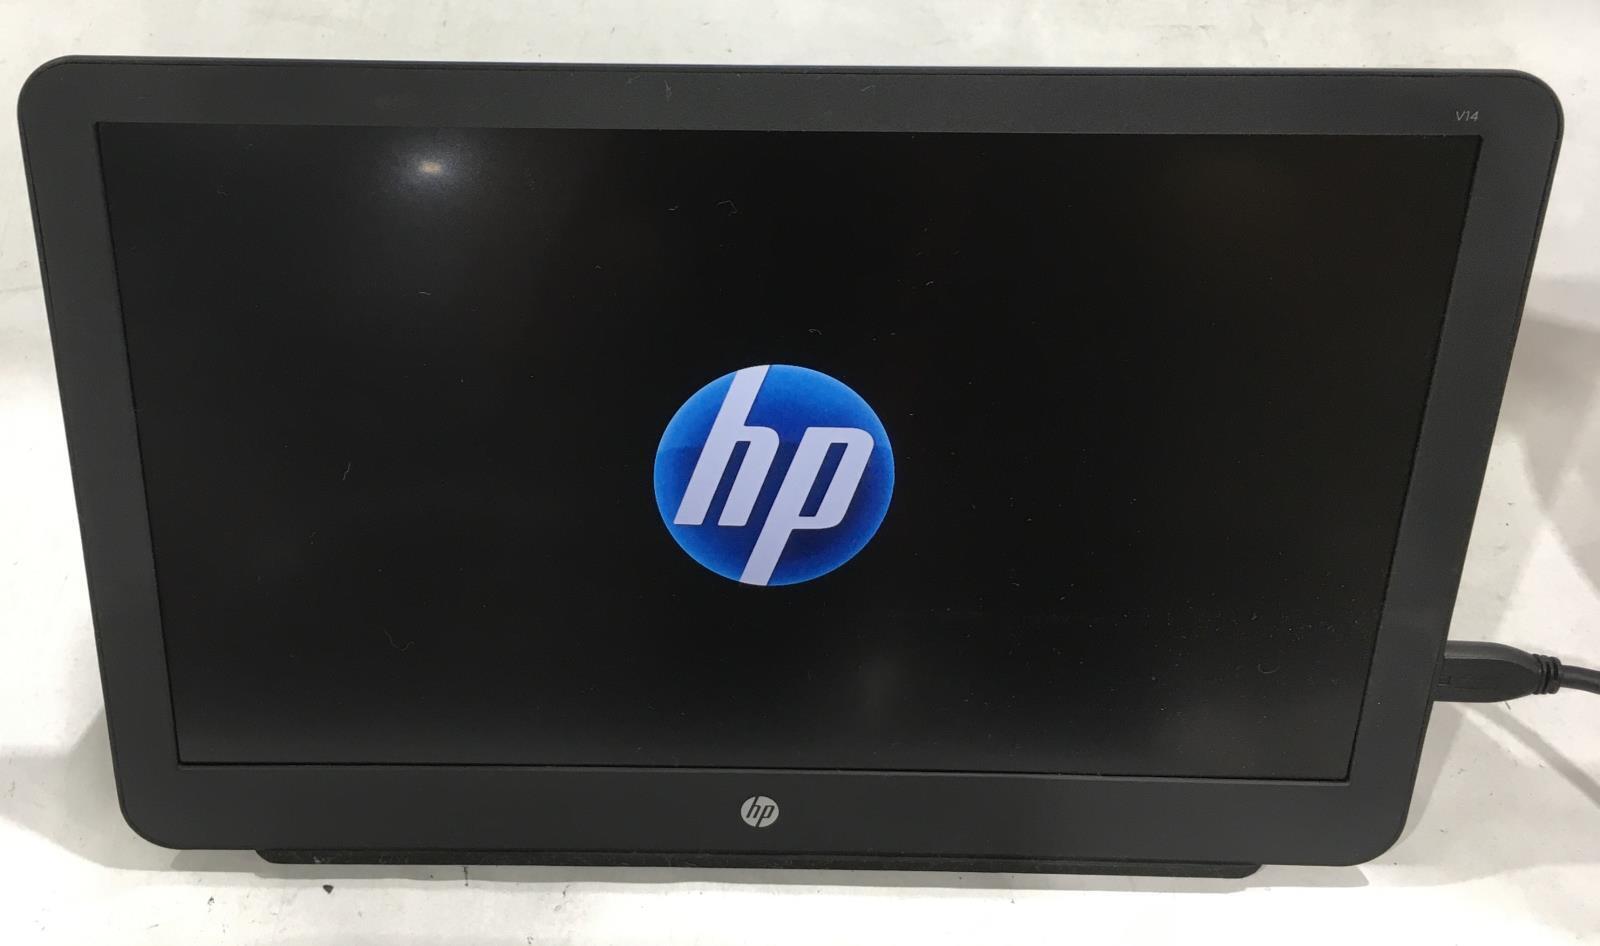 HP - (V14) - Widescreen - 14 - Portable Laptop Monitor - (3TN62A8). Available Now for $34.95